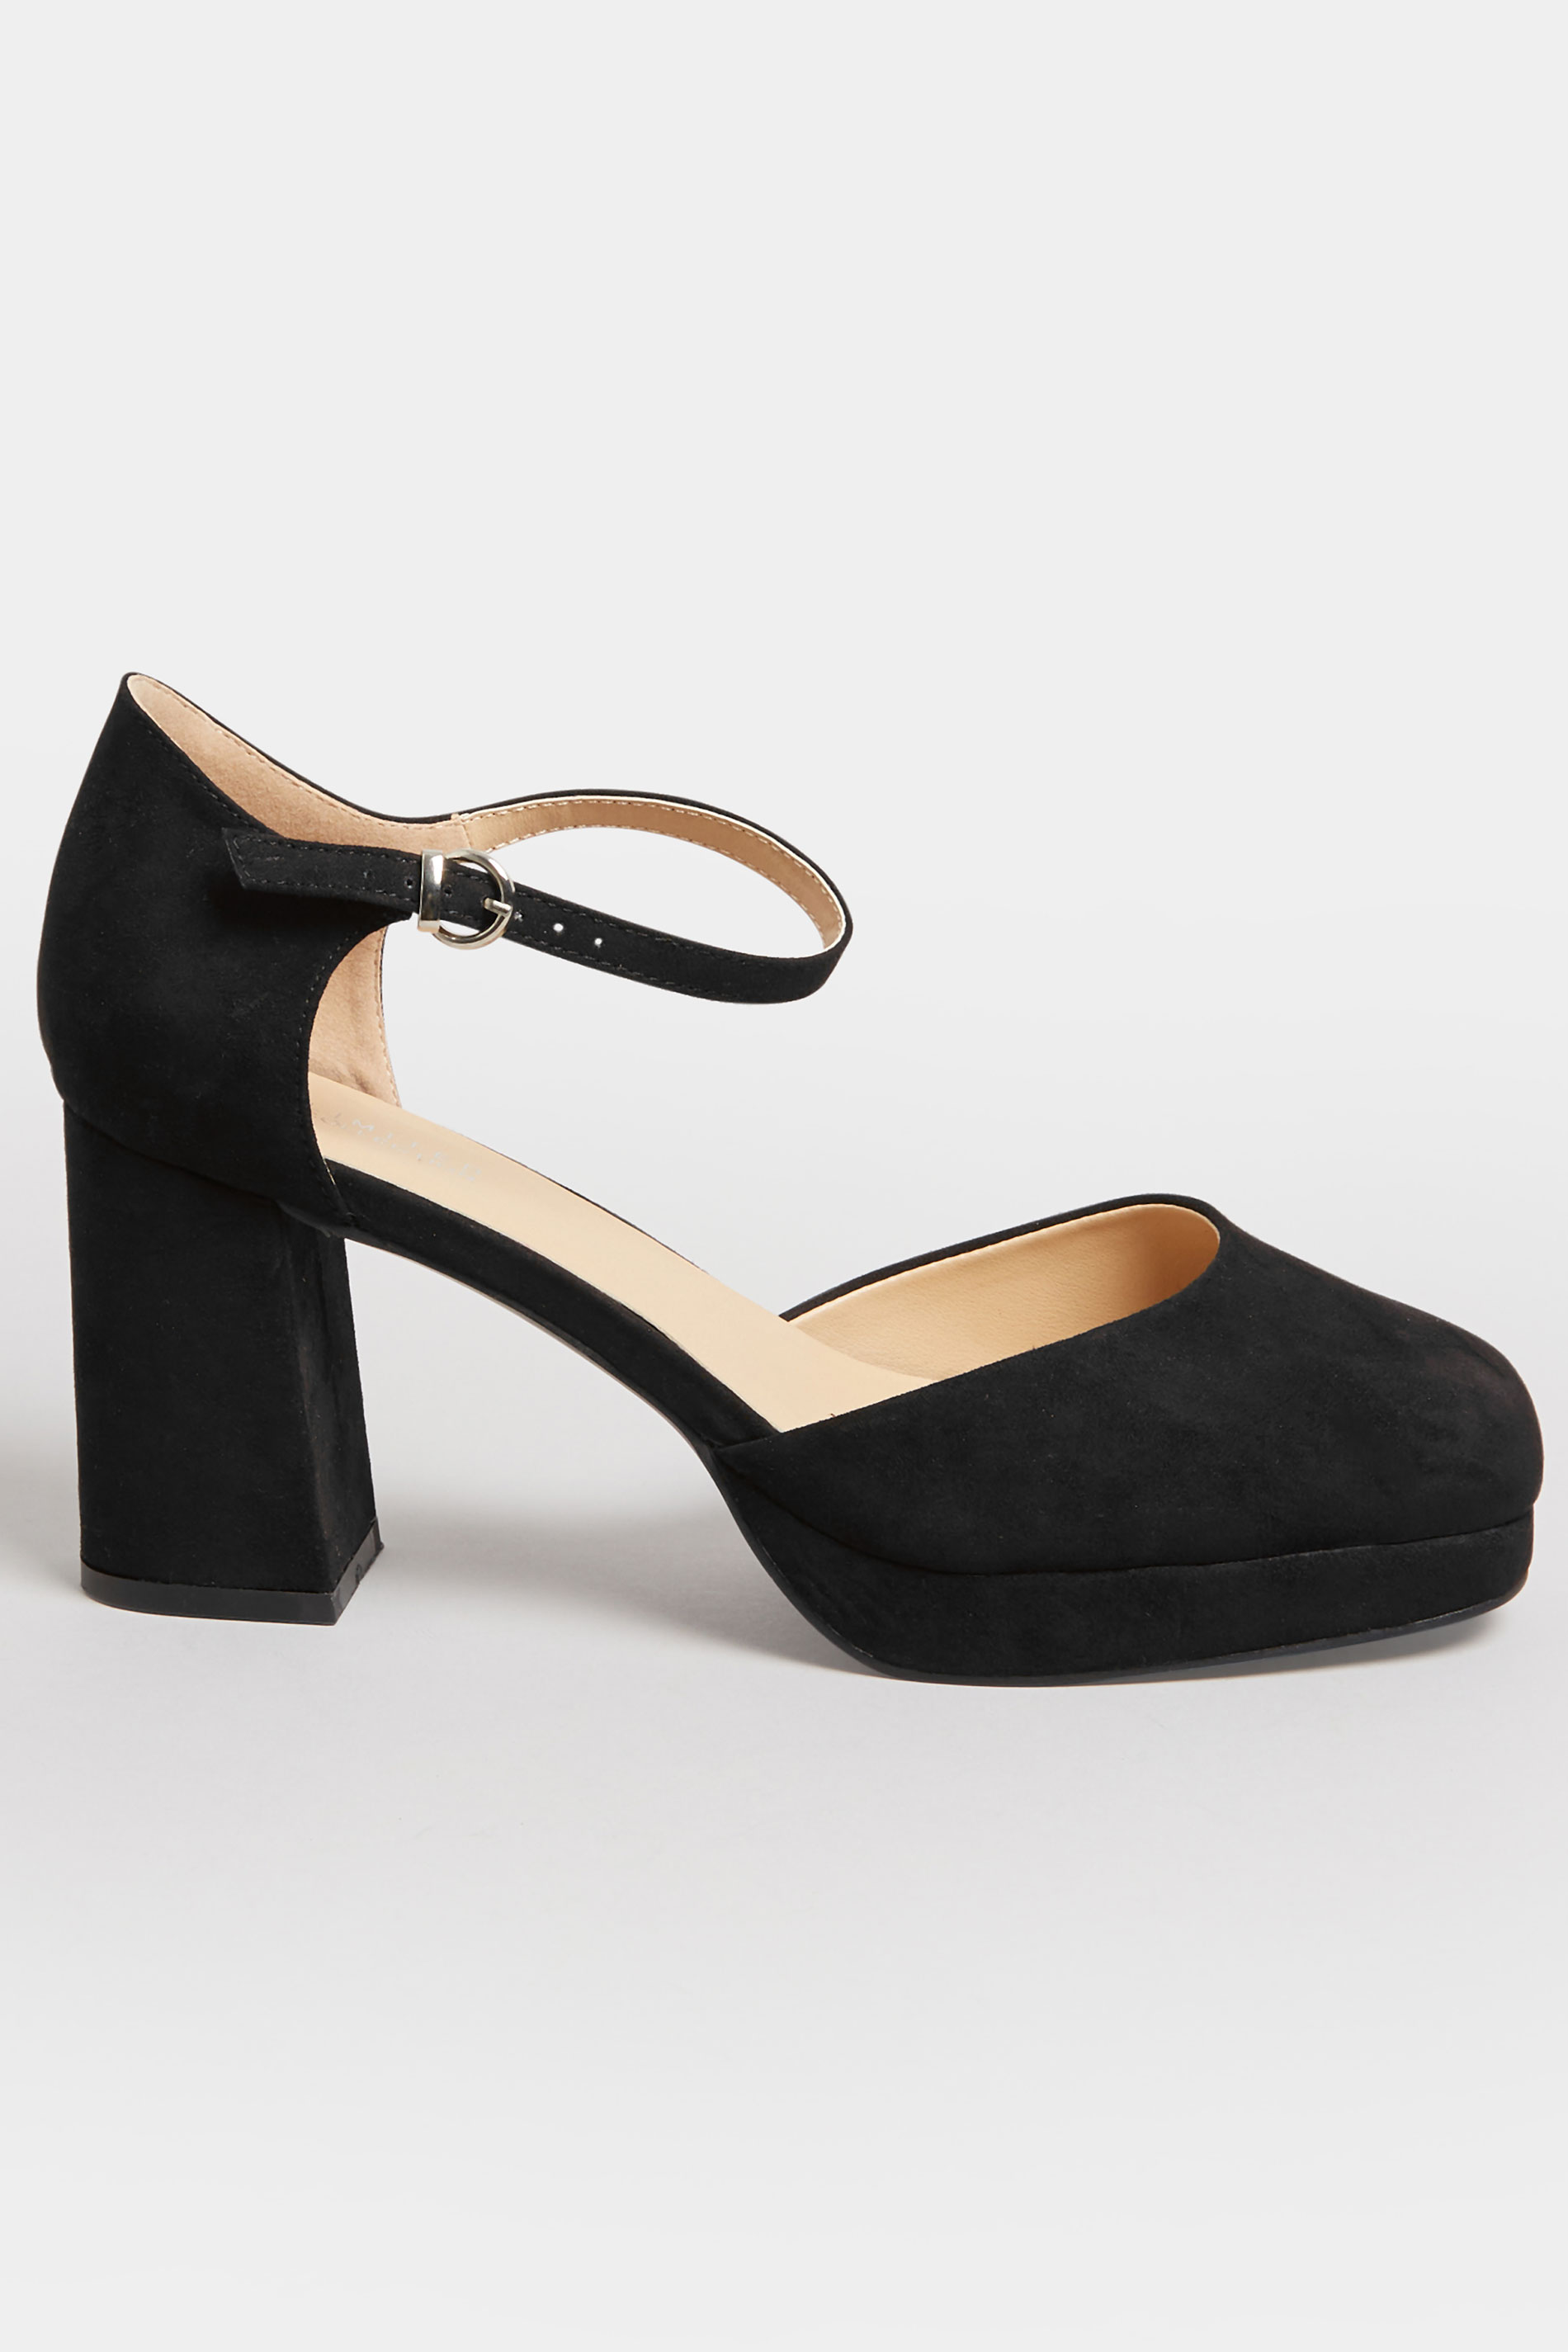 LIMITED COLLECTION Black Platform Court Shoes In Extra Wide EEE Fit ...